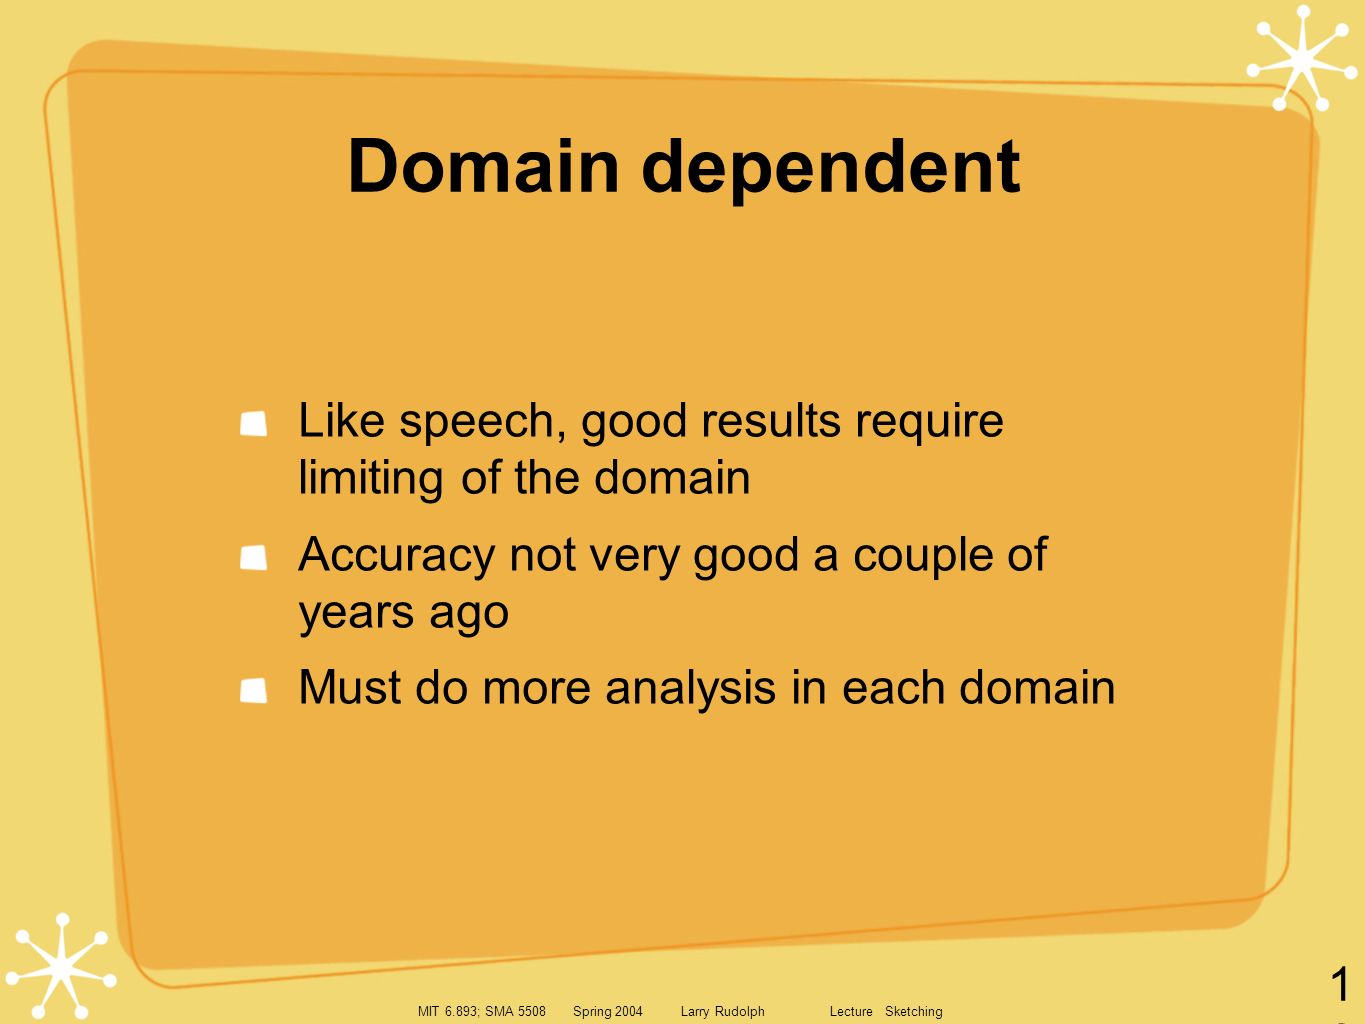 MIT 6.893; SMA 5508 Spring 2004 Larry Rudolph Lecture Sketching 16 Domain dependent Like speech, good results require limiting of the domain Accuracy not very good a couple of years ago Must do more analysis in each domain